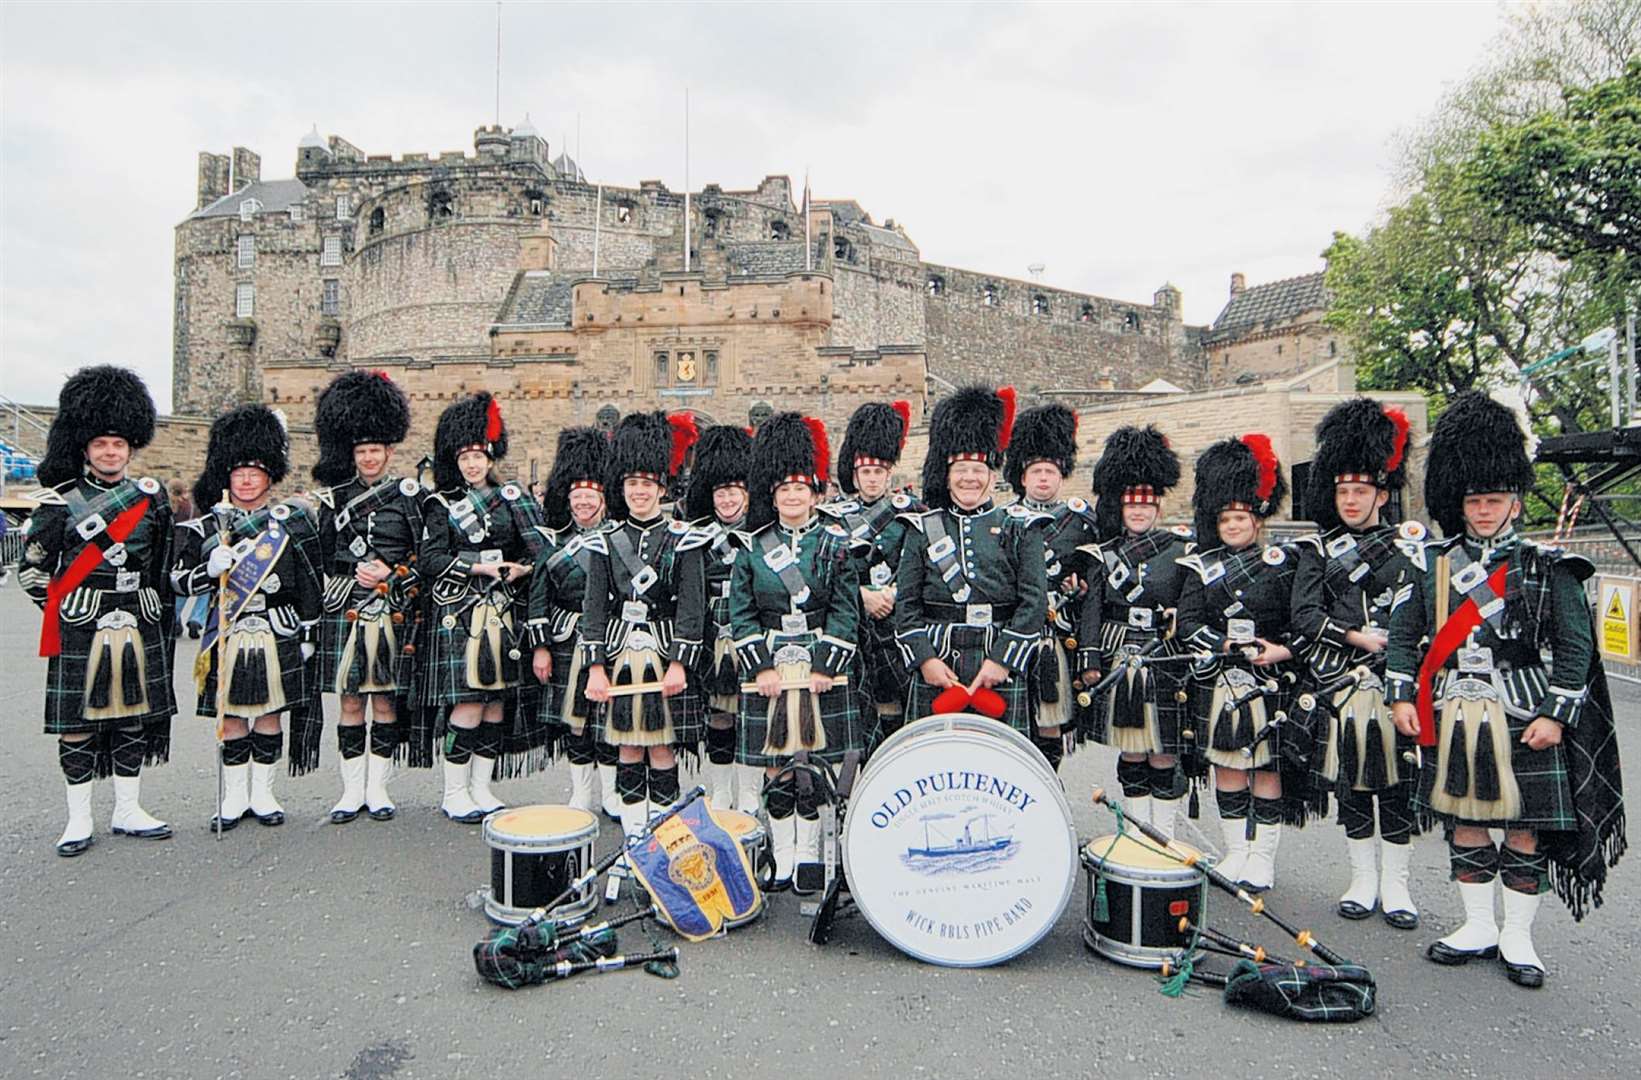 Flashback to 15 years ago when members of Wick RBLS Pipe Band were Beating Retreat at Edinburgh Castle's Esplanade.